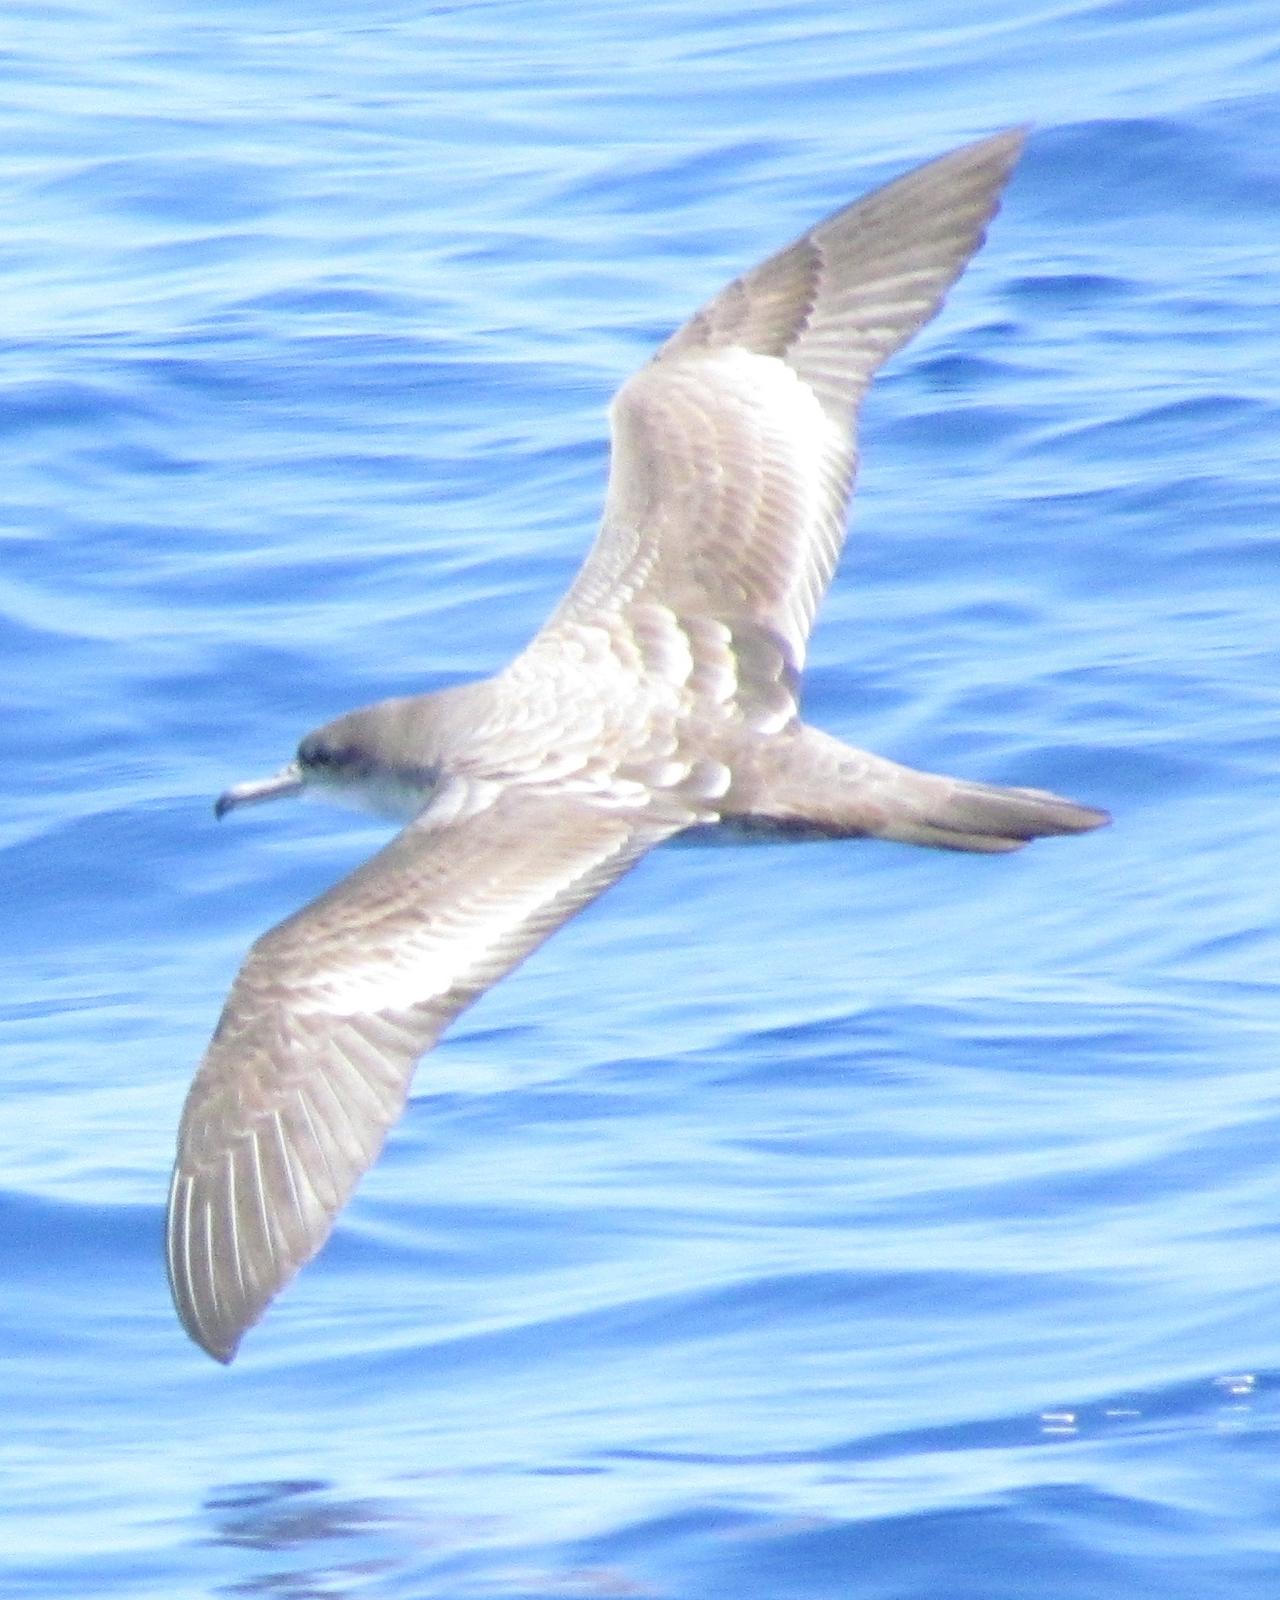 Wedge-tailed Shearwater Photo by C. Darren Dowell